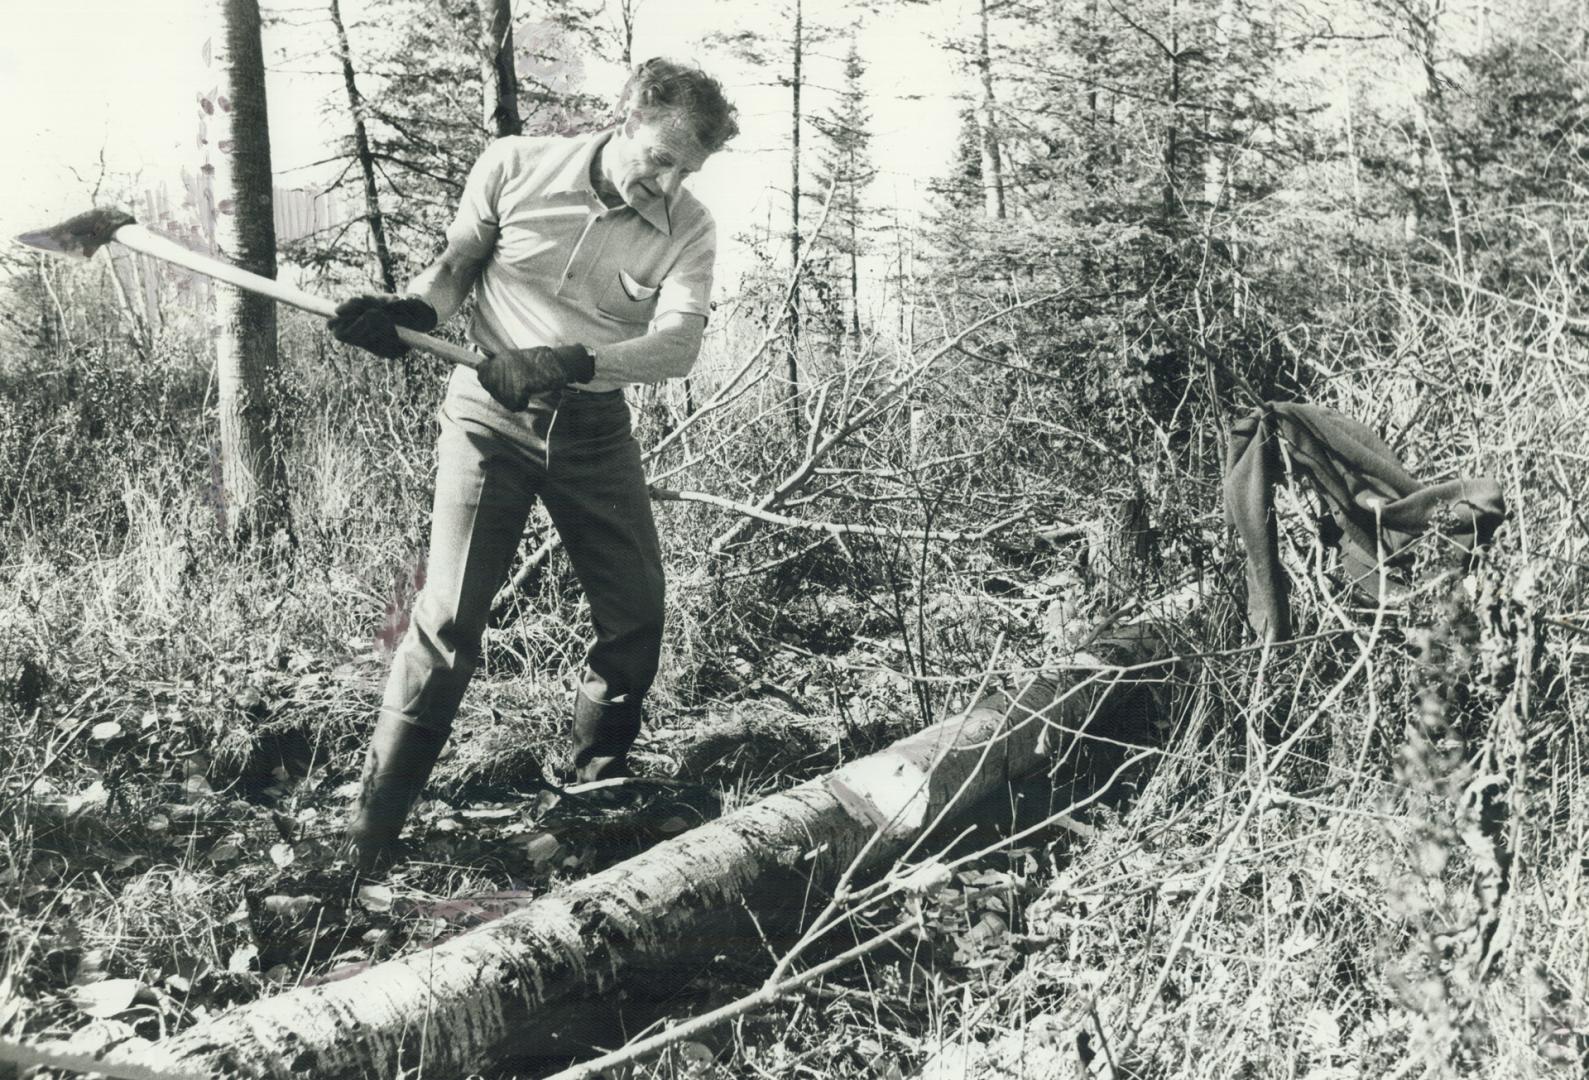 Chairman of royal Commission on electric power planning, Arthur Porter, shown here chopping wood at his cottage, sees a need to swing toward conservin(...)